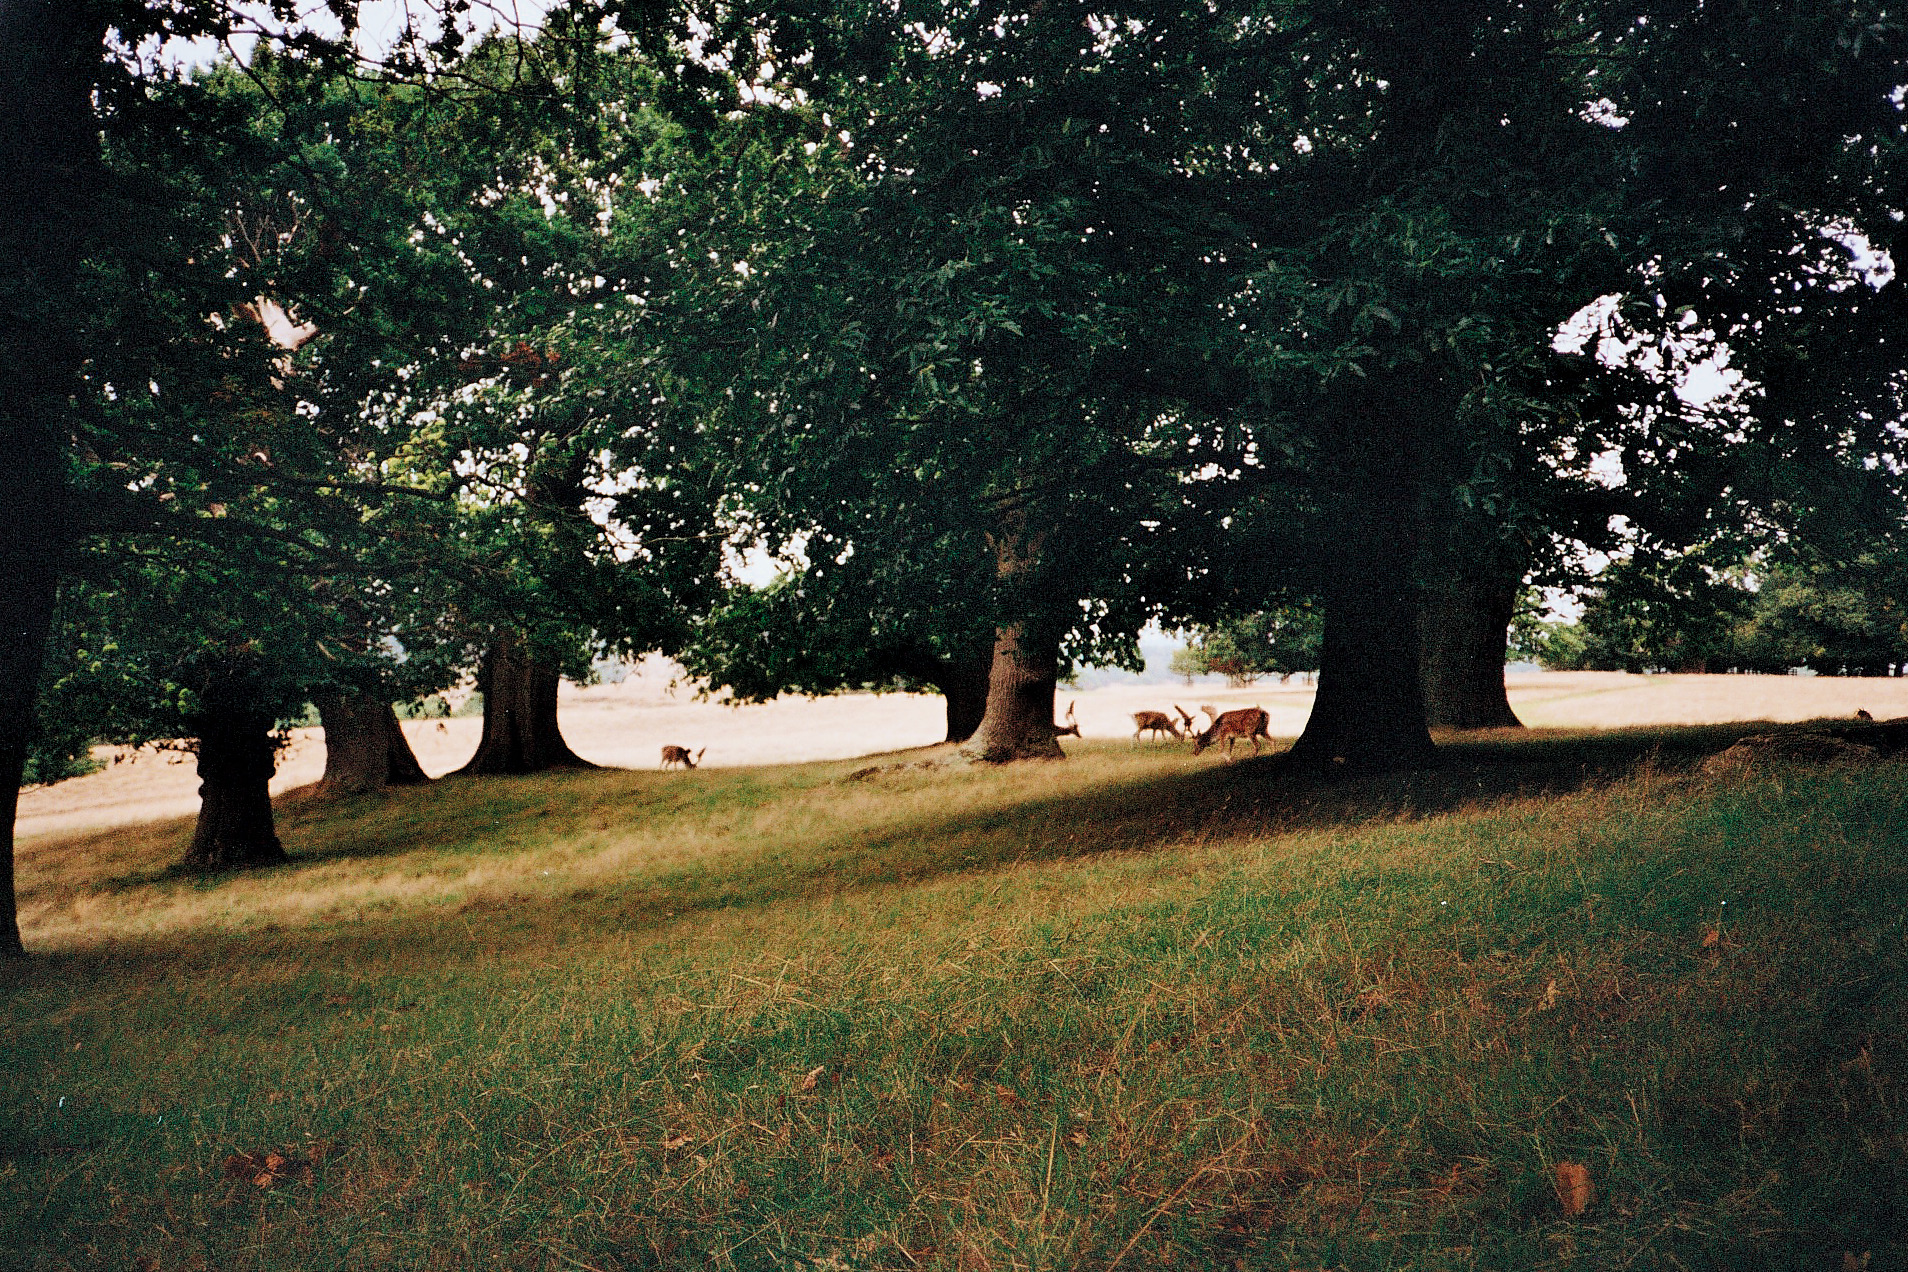 trees and grass in a field with low lying grass